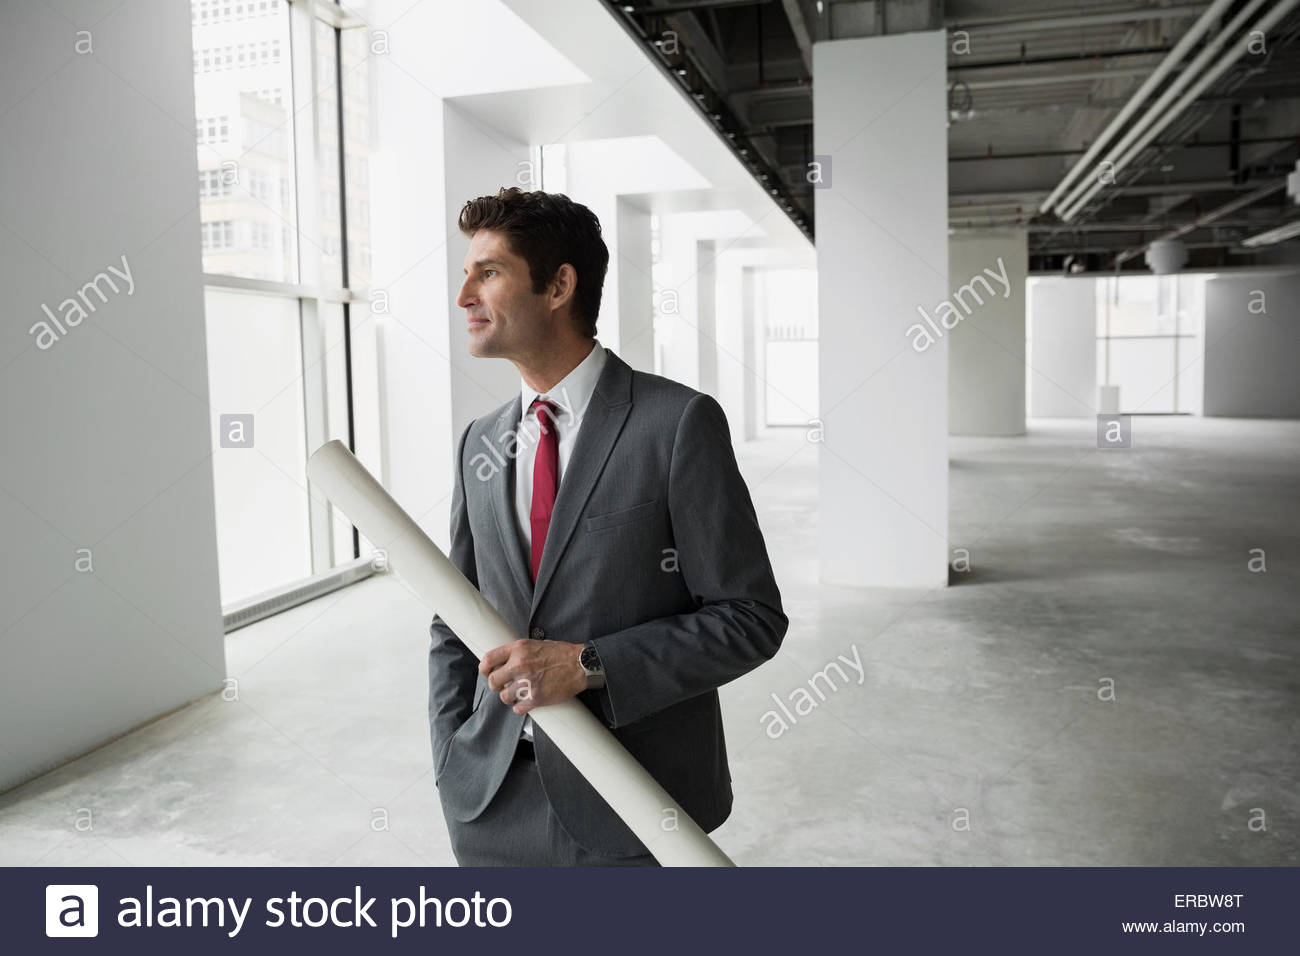 Architect holding blueprints in empty office Stock Photo